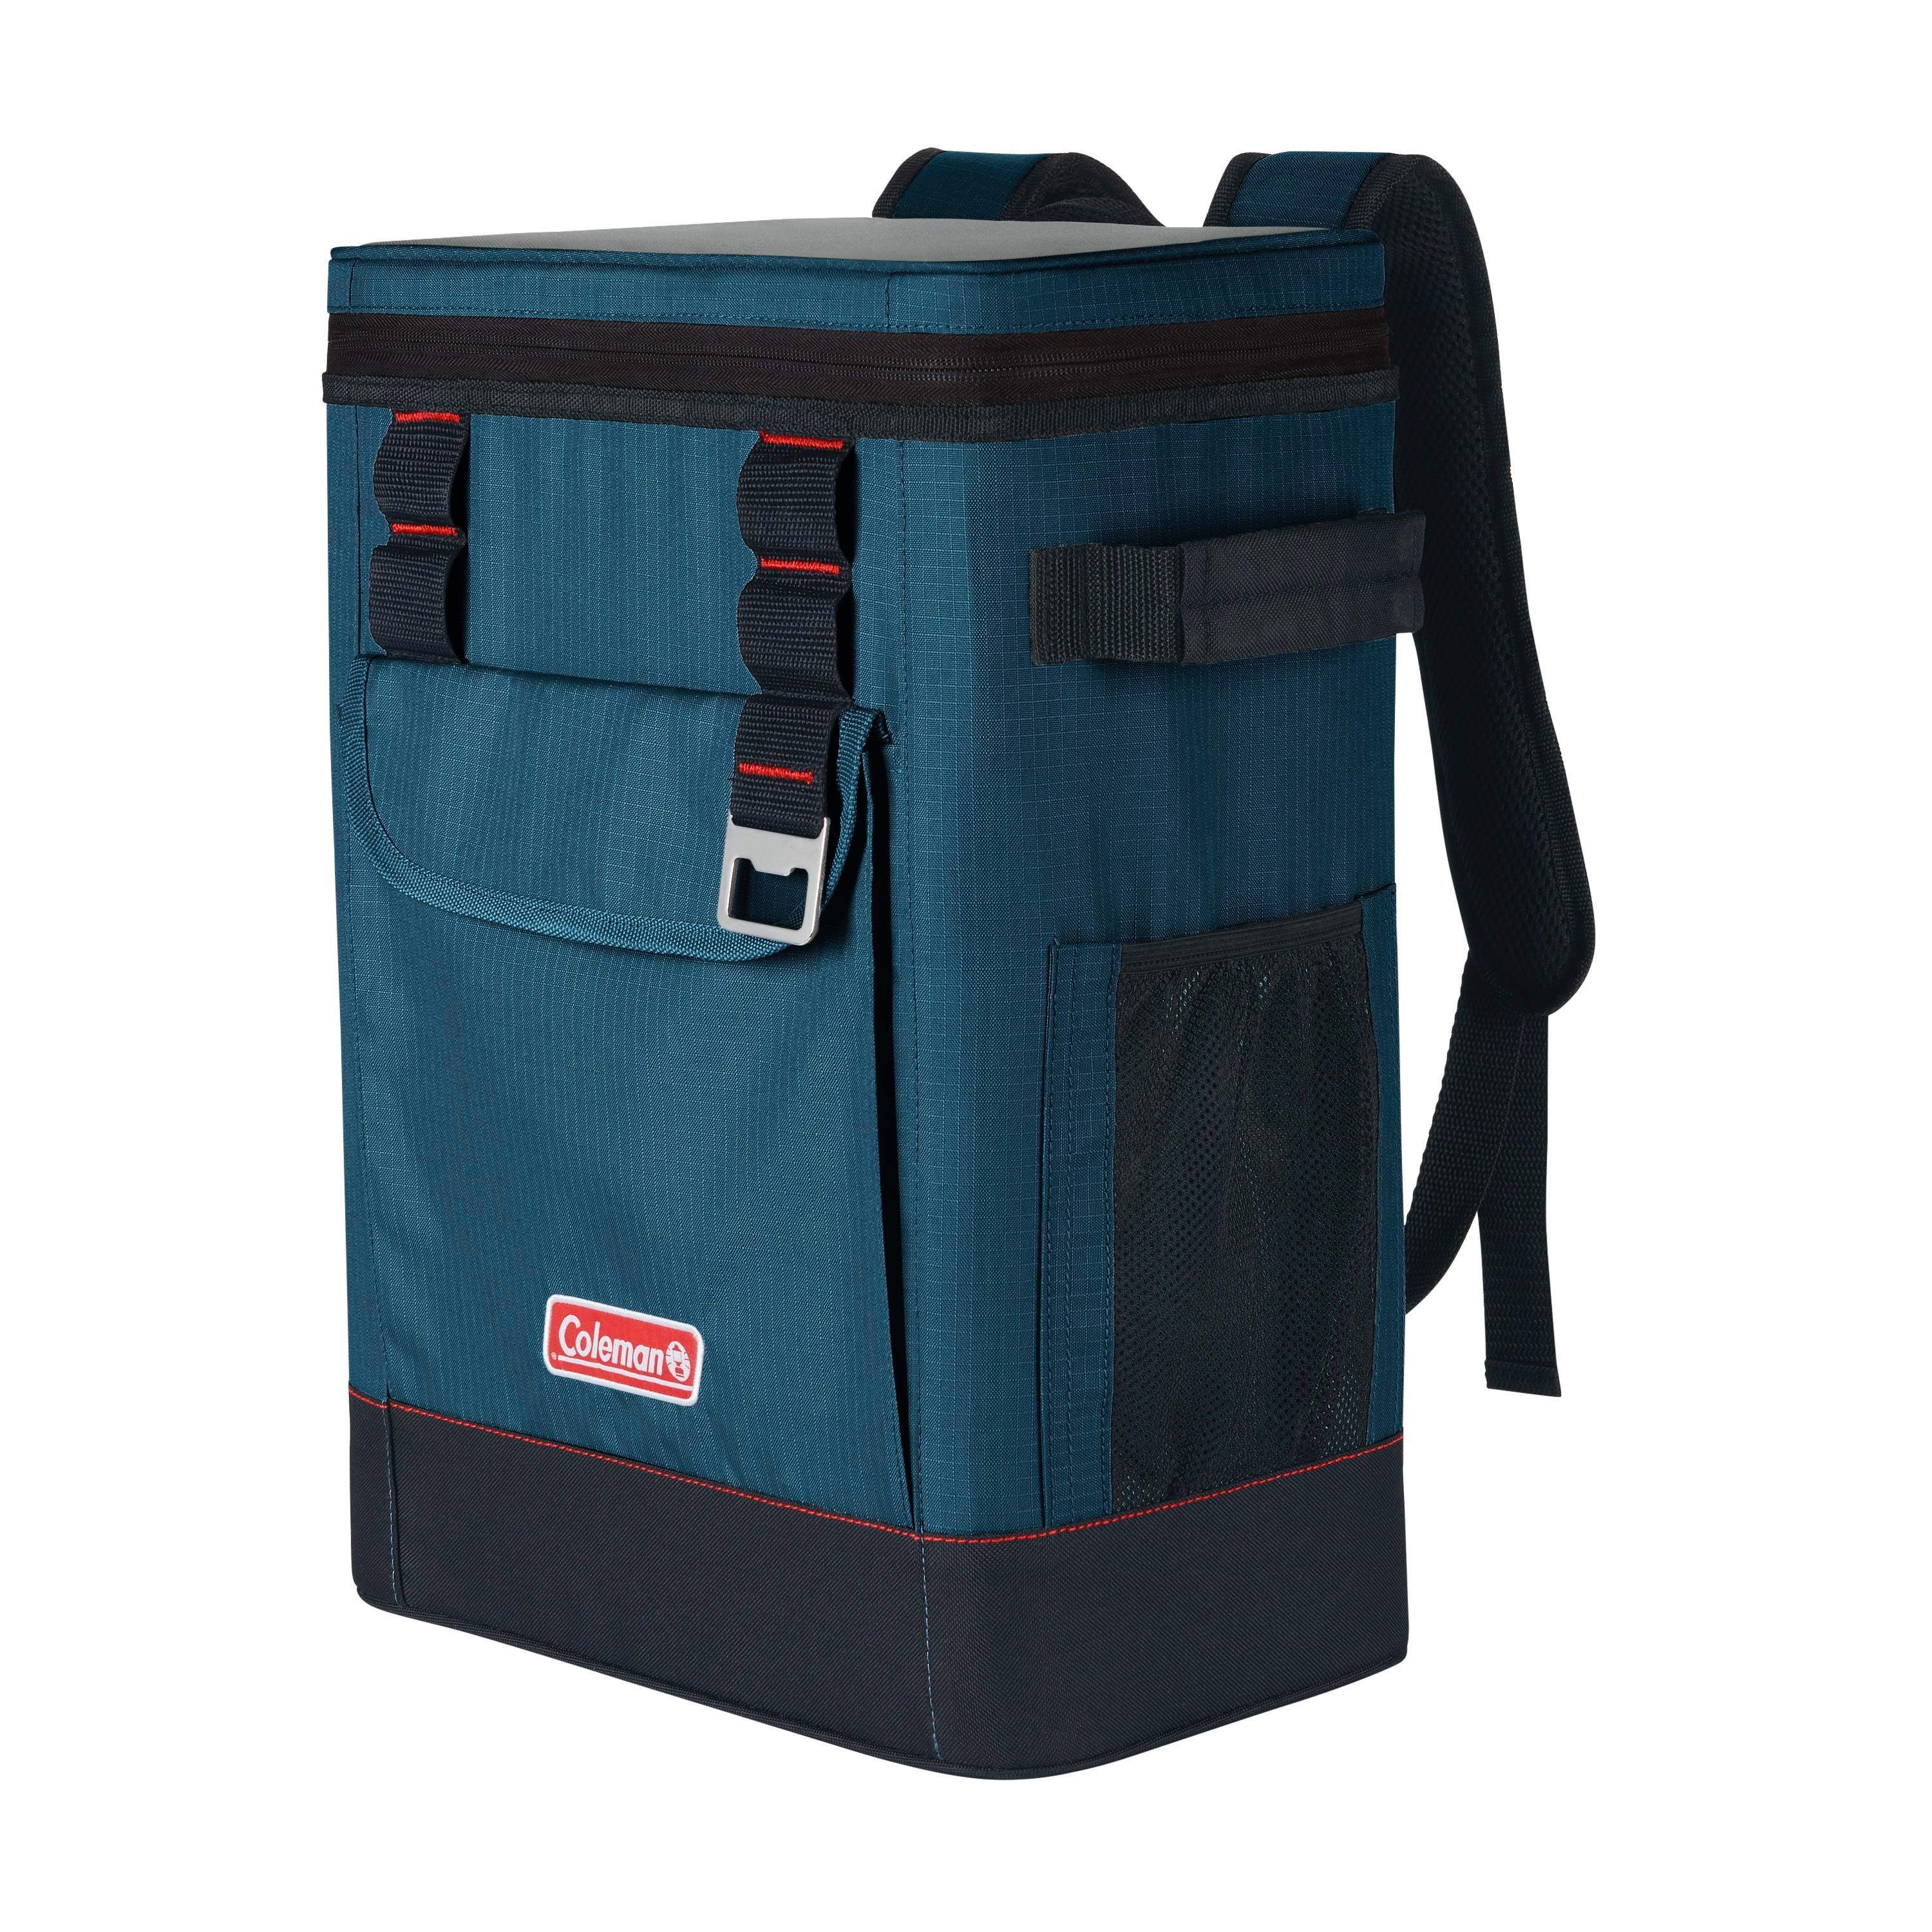 Portable Soft Insulated Cooler Bag With Ice Pack and Adjustable Strap and Pocket 